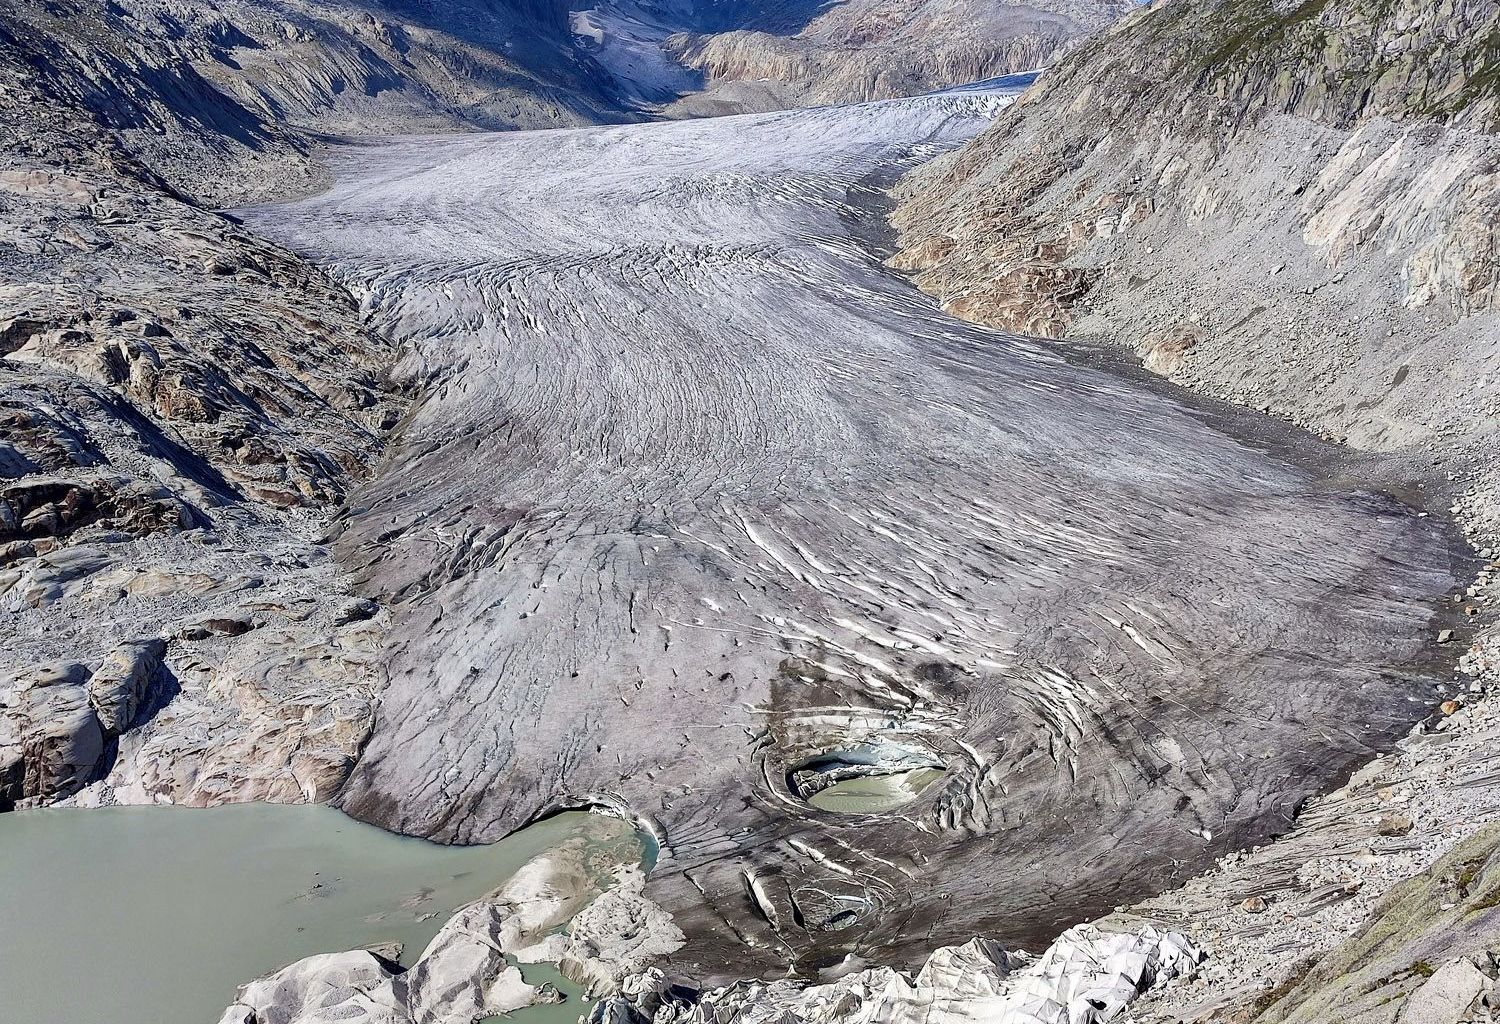 The tongue of the Rhone Glacier in Valais is collapsing. The artificial glacier shroud is unable to prevent this.